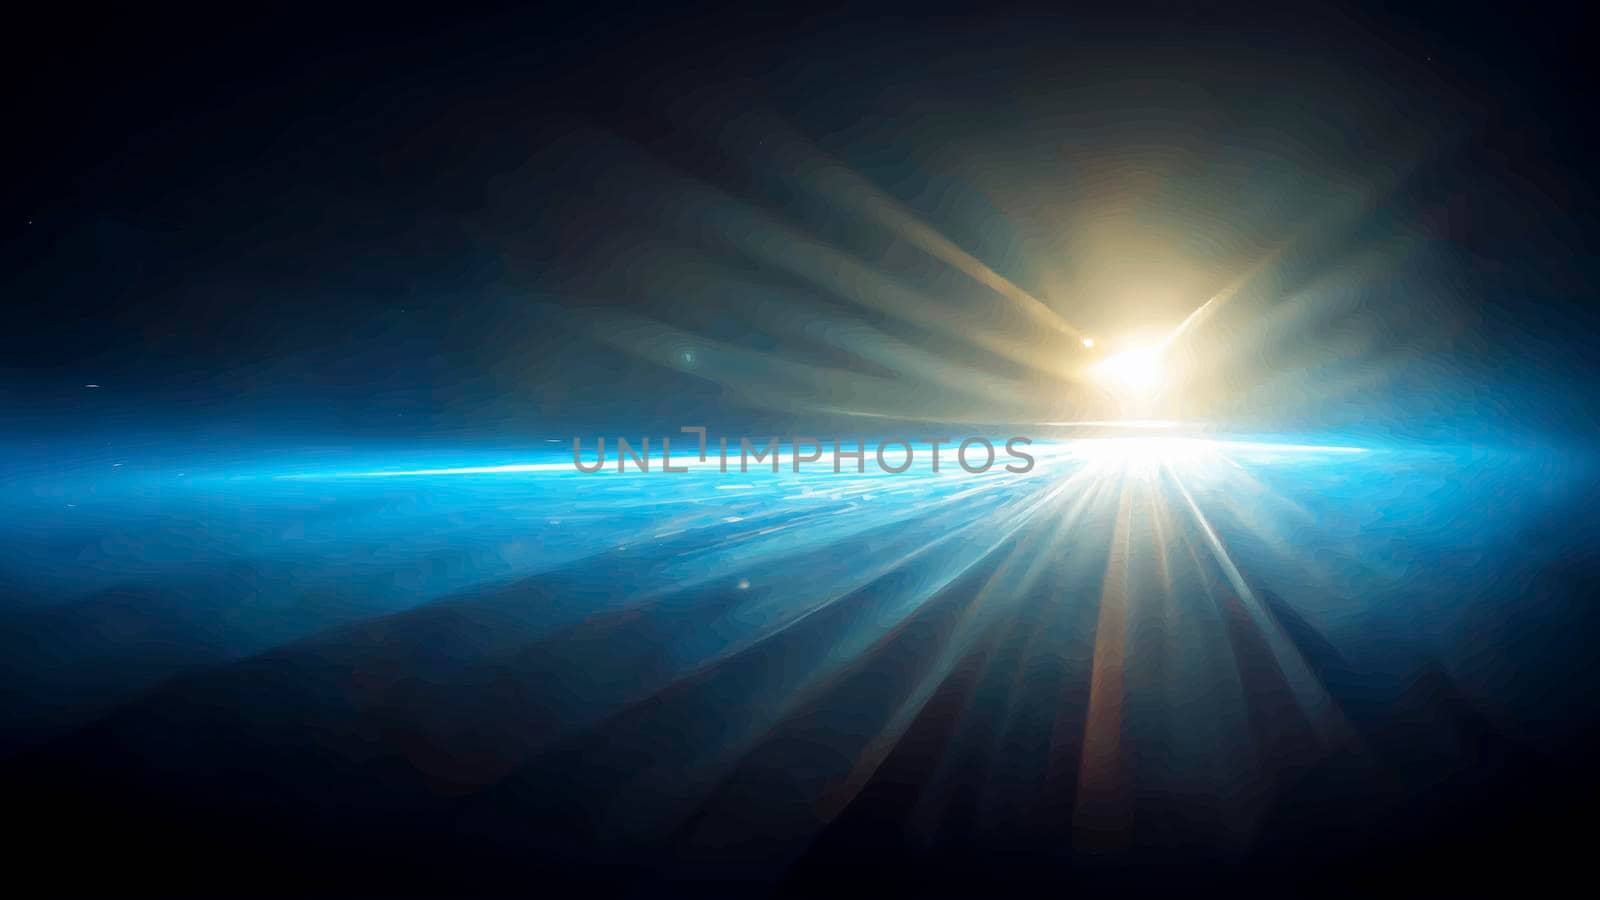 Light Lens flare on black background. Light Lens flare on black background. Lens flare with bright light isolated with a black background. Used for textures and materials.